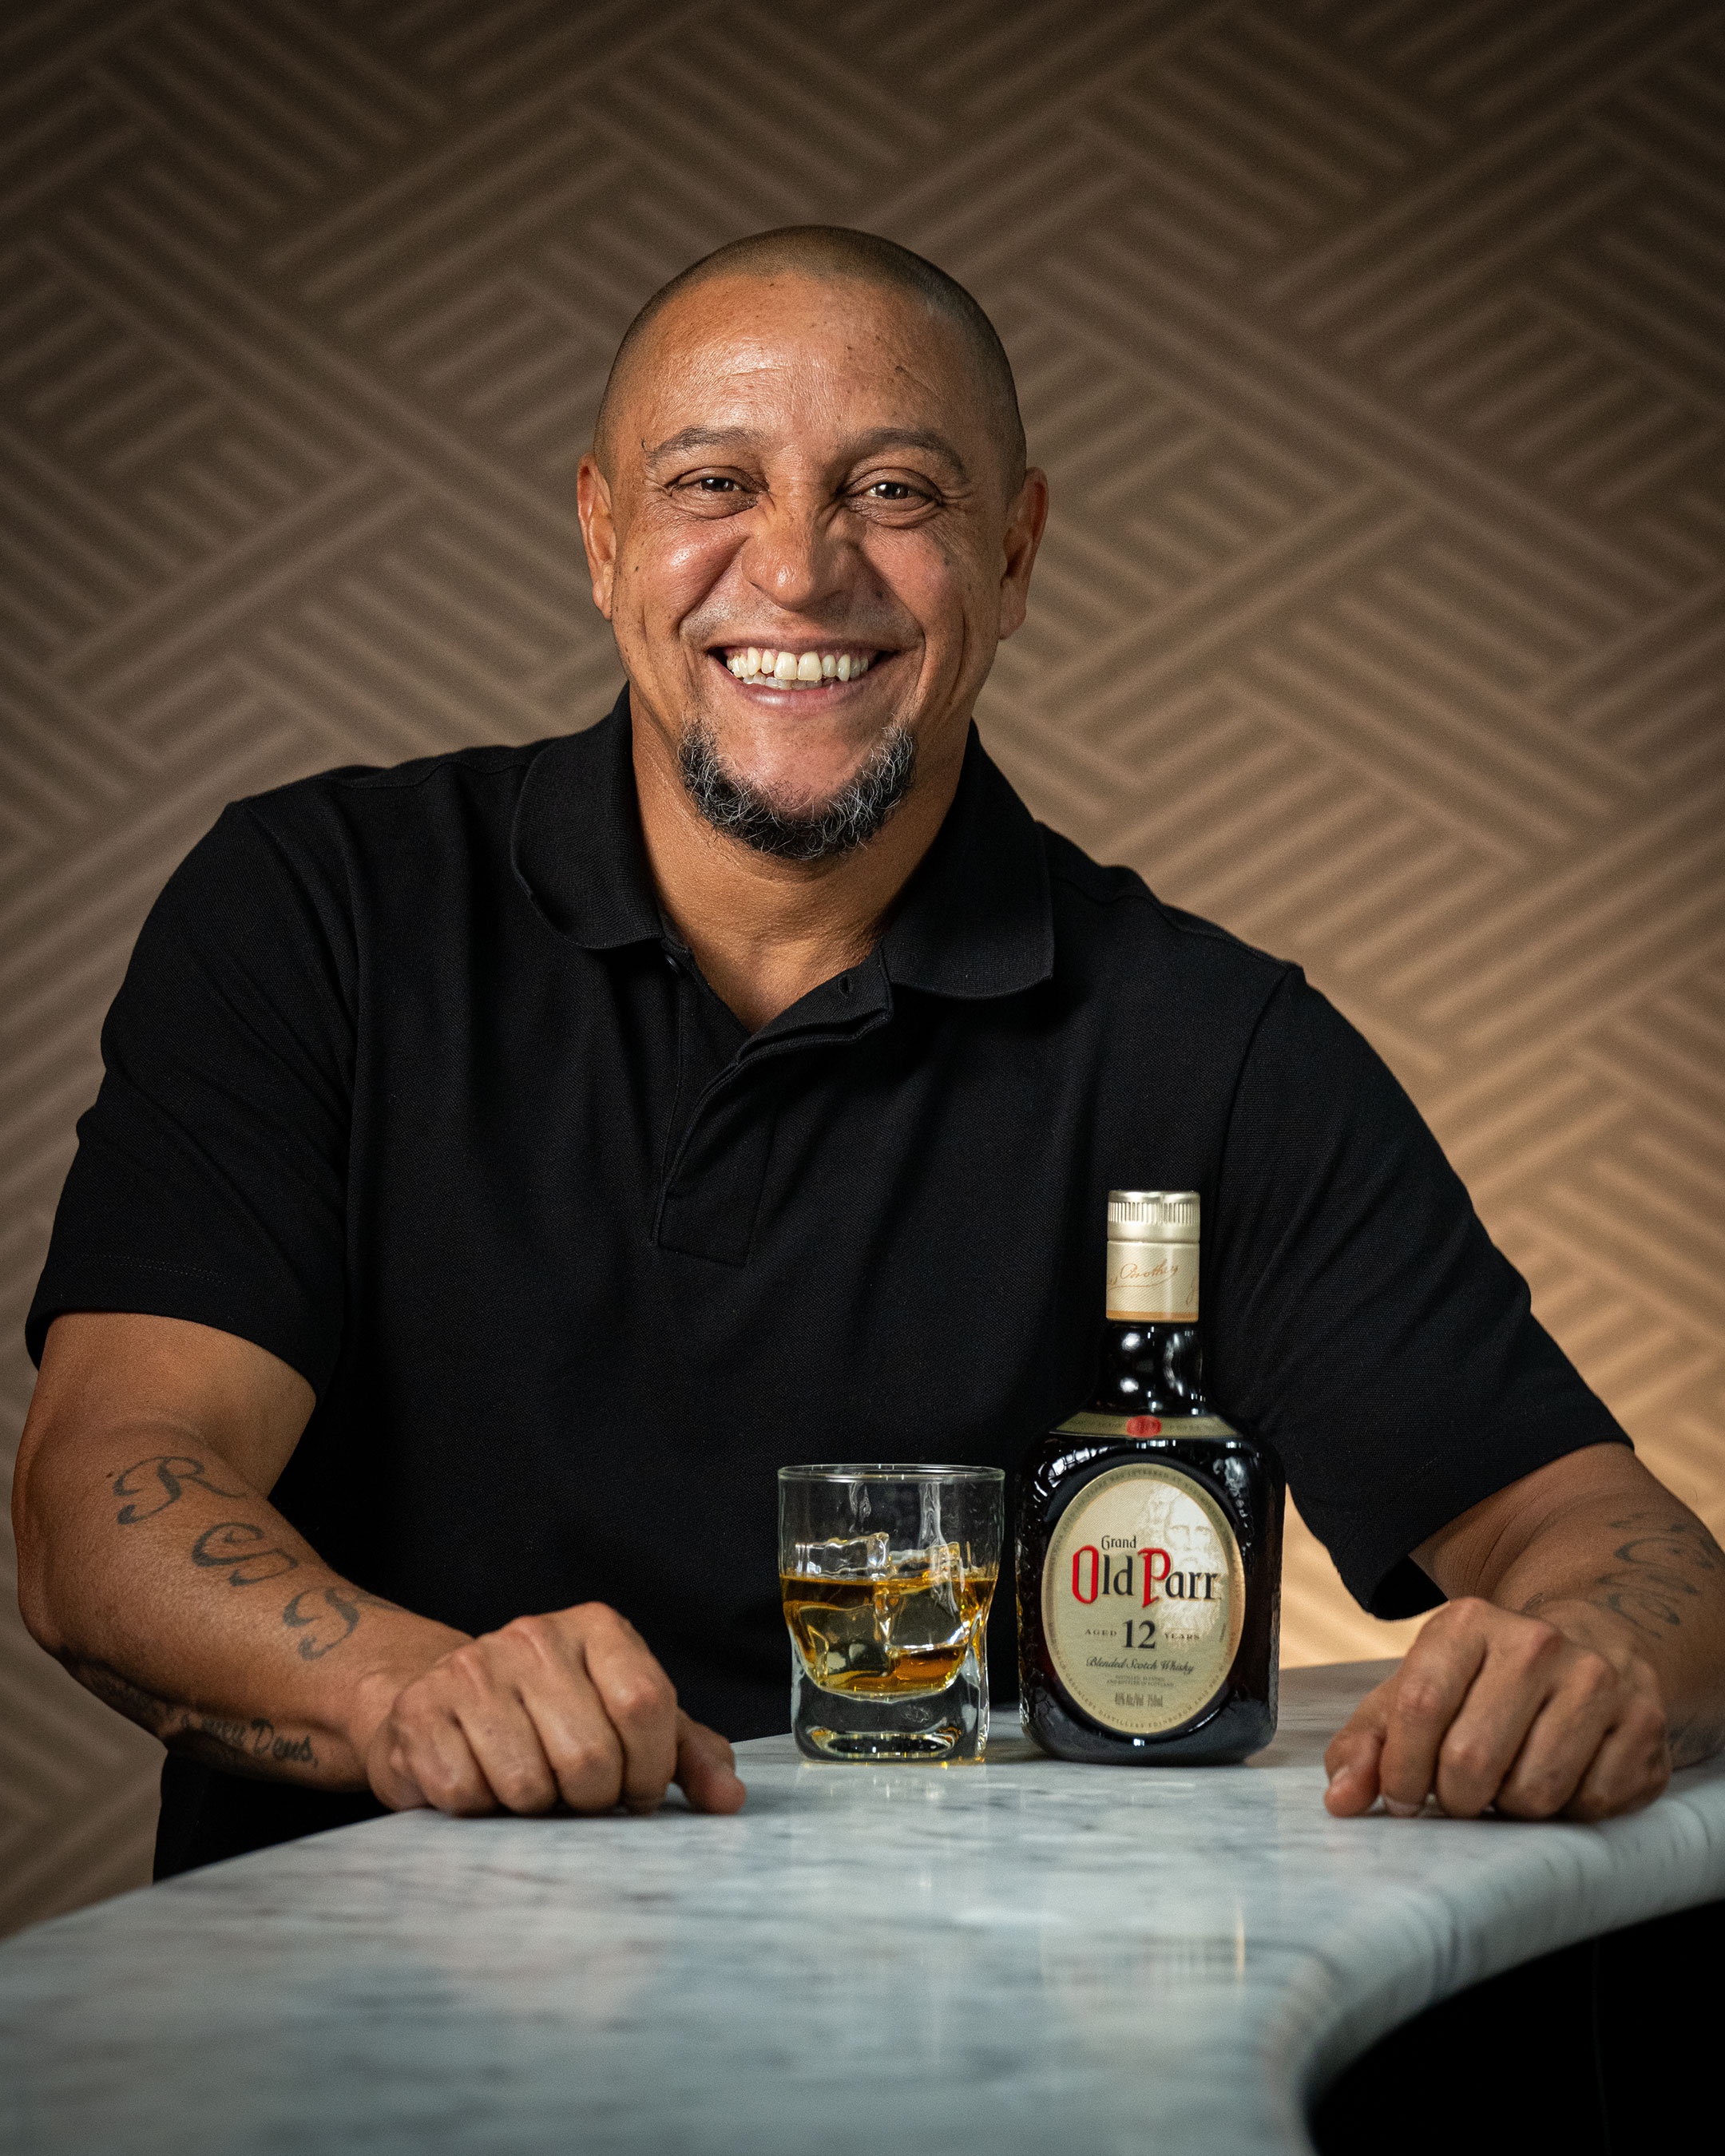 OLD PARR SCOTCH WHISKY AND BRAZILIAN FÚTBOL LEGEND ROBERTO CARLOS ARE OFFERING FANS A CHANCE TO WIN A TRIP TO MIAMI FOR THE BIGGEST FÚTBOL EVENT OF THE SUMMER